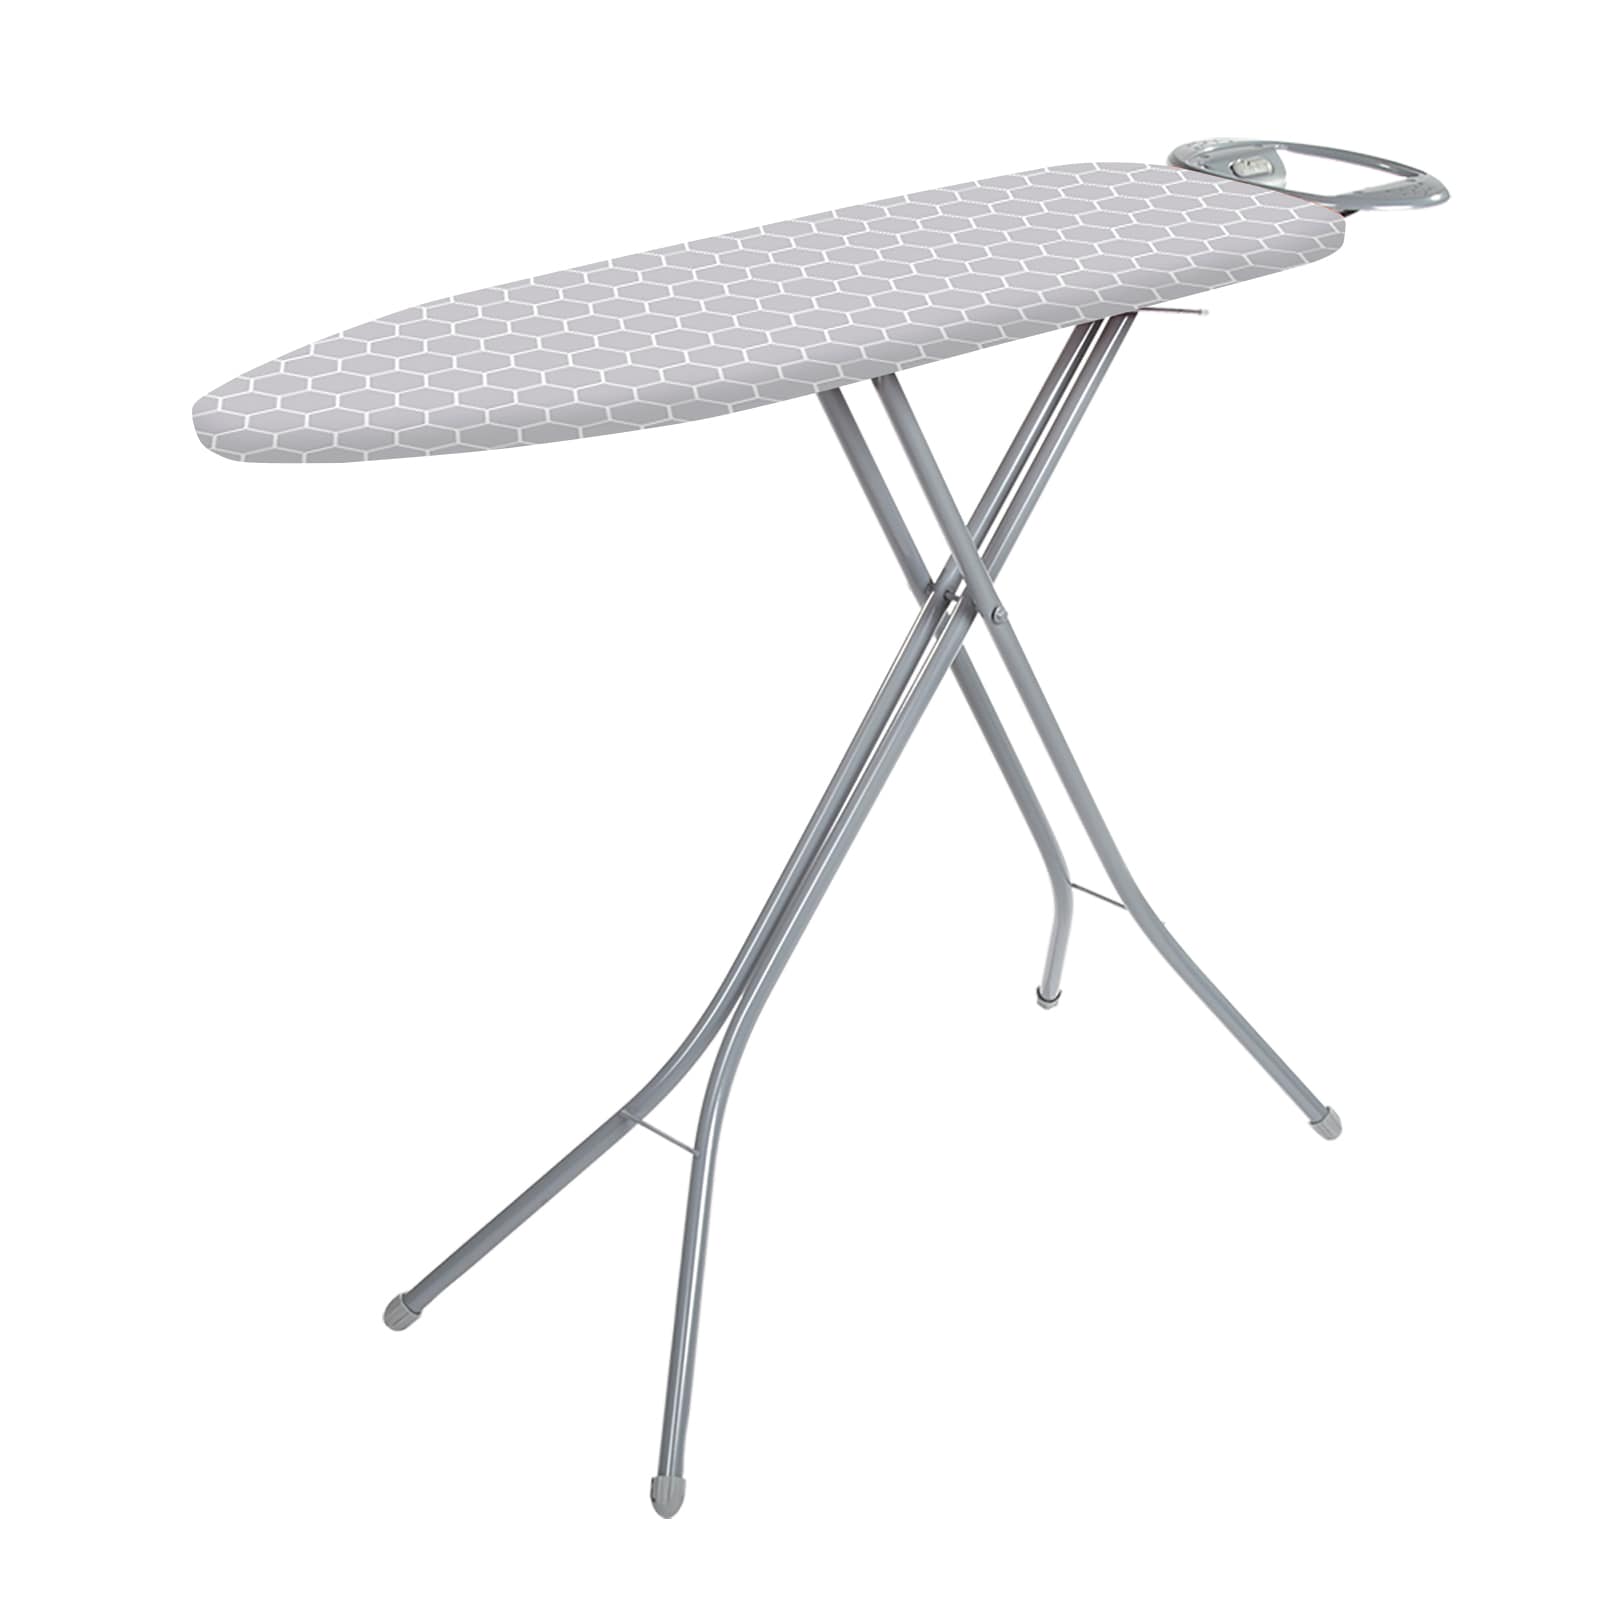 110cm x 35cm Minky Reflector Ironing Board Cover 